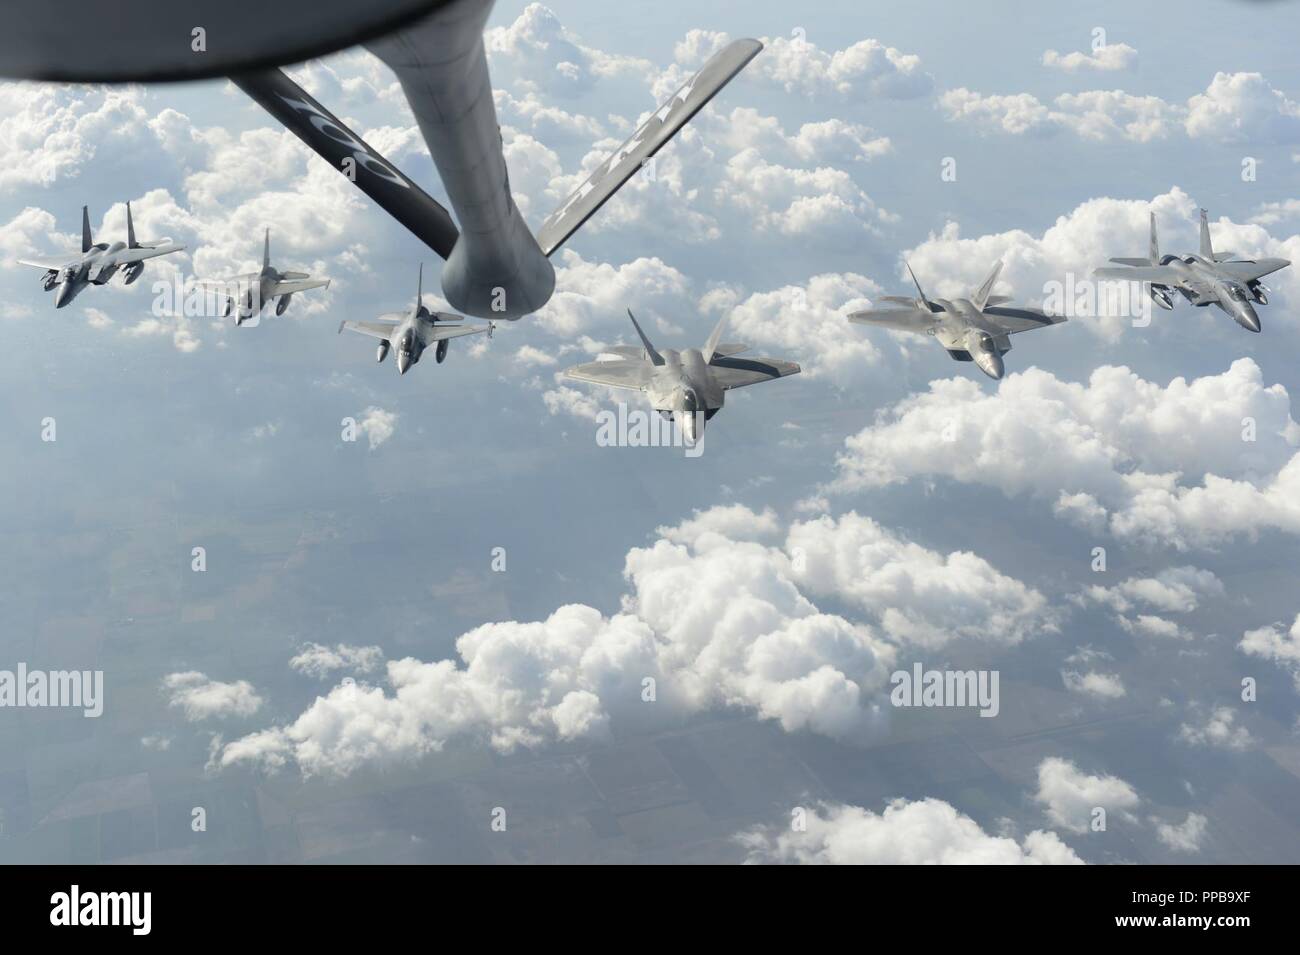 U.S. Air Force F-15C Eagles, F-22 Raptors and Romanian F-16 Fighting Falcons fly in formation above Bucharest, Romania, Aug. 20, 2018. During their deployment to Germany, the F-22s forward deployed to operating locations to assert the U.S. ability to quickly respond and assure allies and partners of U.S. presence in Europe is forward and ready. Stock Photo